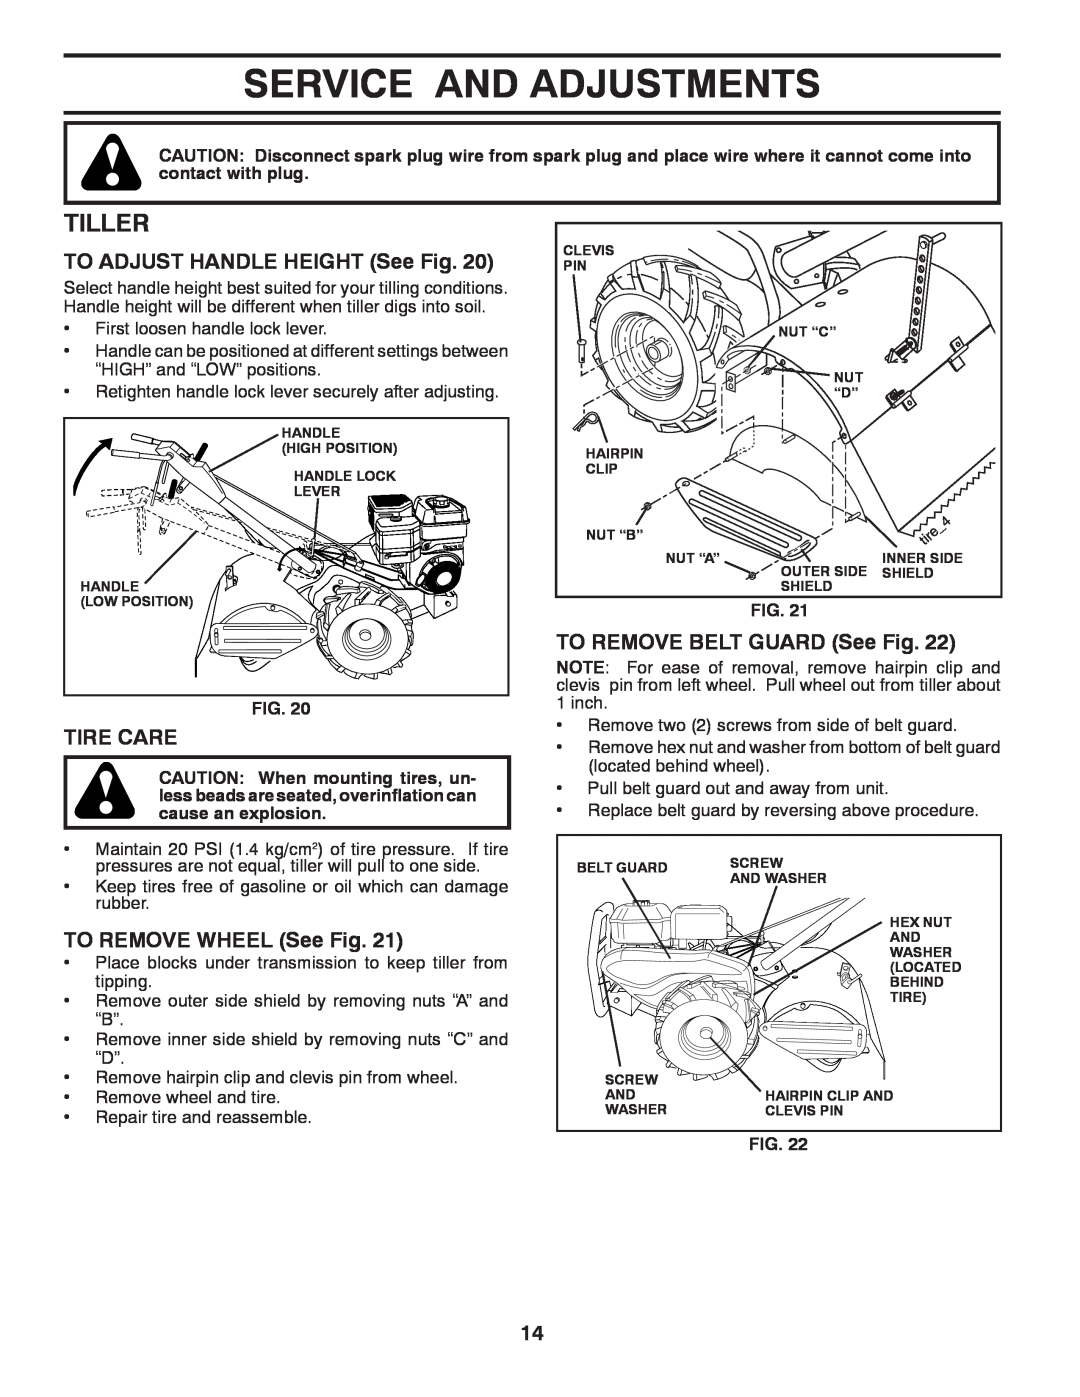 Poulan PRRT875X manual Service And Adjustments, Tiller, TO ADJUST HANDLE HEIGHT See Fig, Tire Care, TO REMOVE WHEEL See Fig 